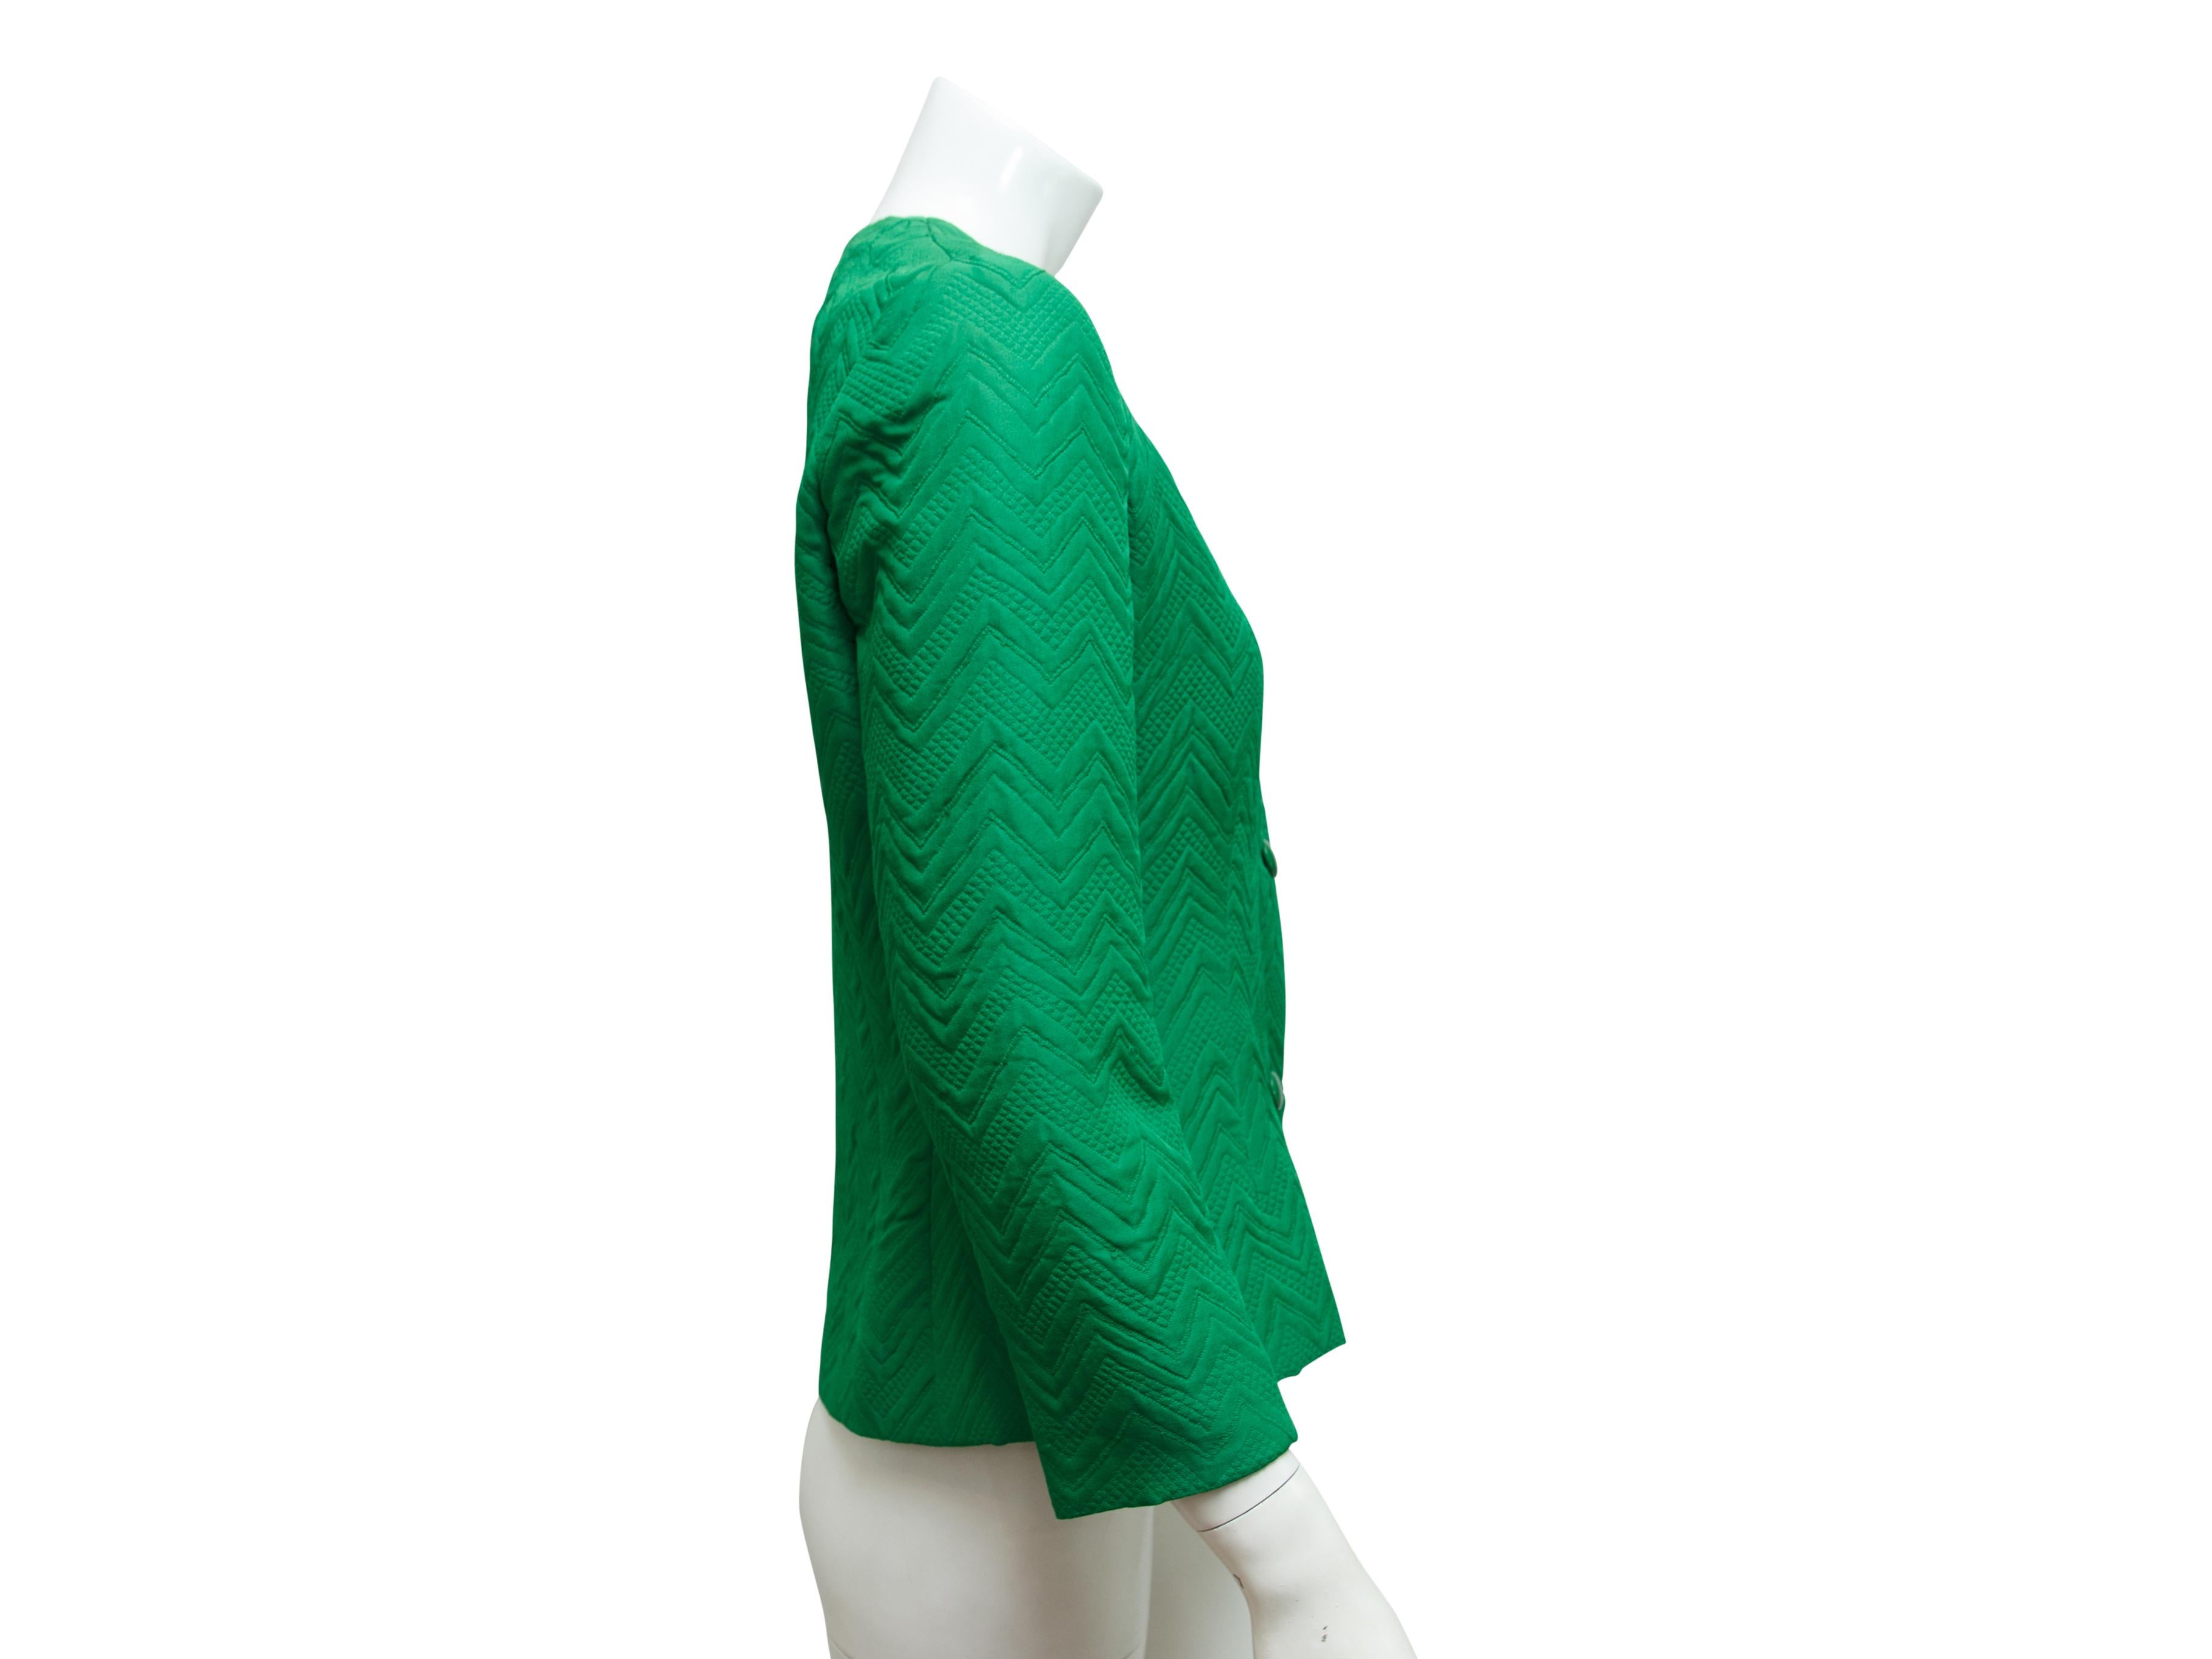 Product details:  Vintage green wool-blend chevron jacket by Givenchy.  V-neck.  Bracelet-length sleeves.  Button-front closure.  34